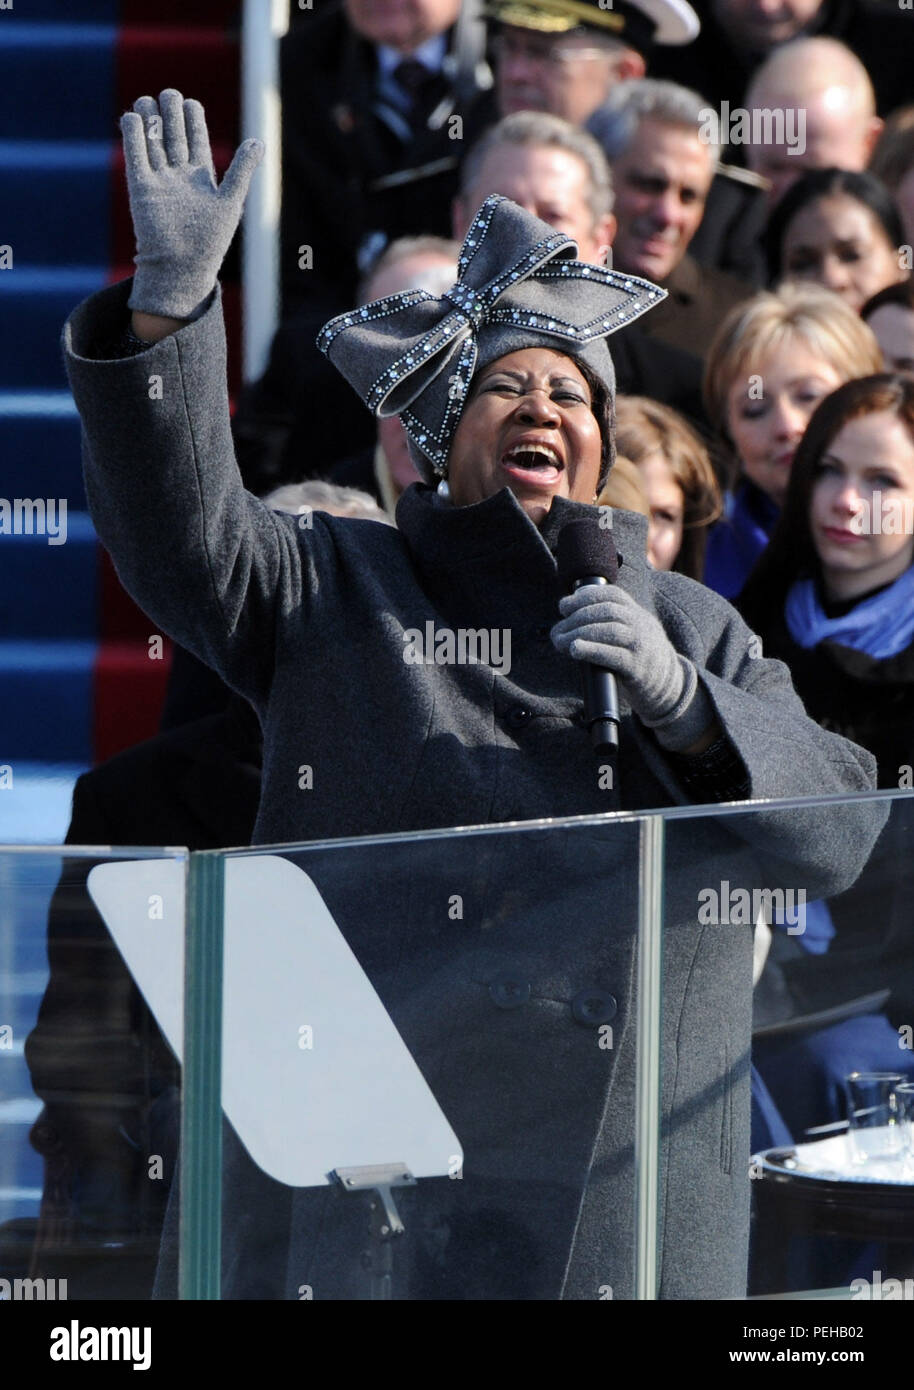 Washington, DC - January 20, 2009 -- United States SInger Aretha Franklin performs at the the 56th Presidential Inauguration ceremony for Barack Obama as the 44th President of the United States in Washington, DC, USA 20 January 2009. Obama defeated Republican candidate John McCain on Election Day 04 November 2008 to become the next U.S. President.Credit: Pat Benic - Pool via CNP | usage worldwide Stock Photo